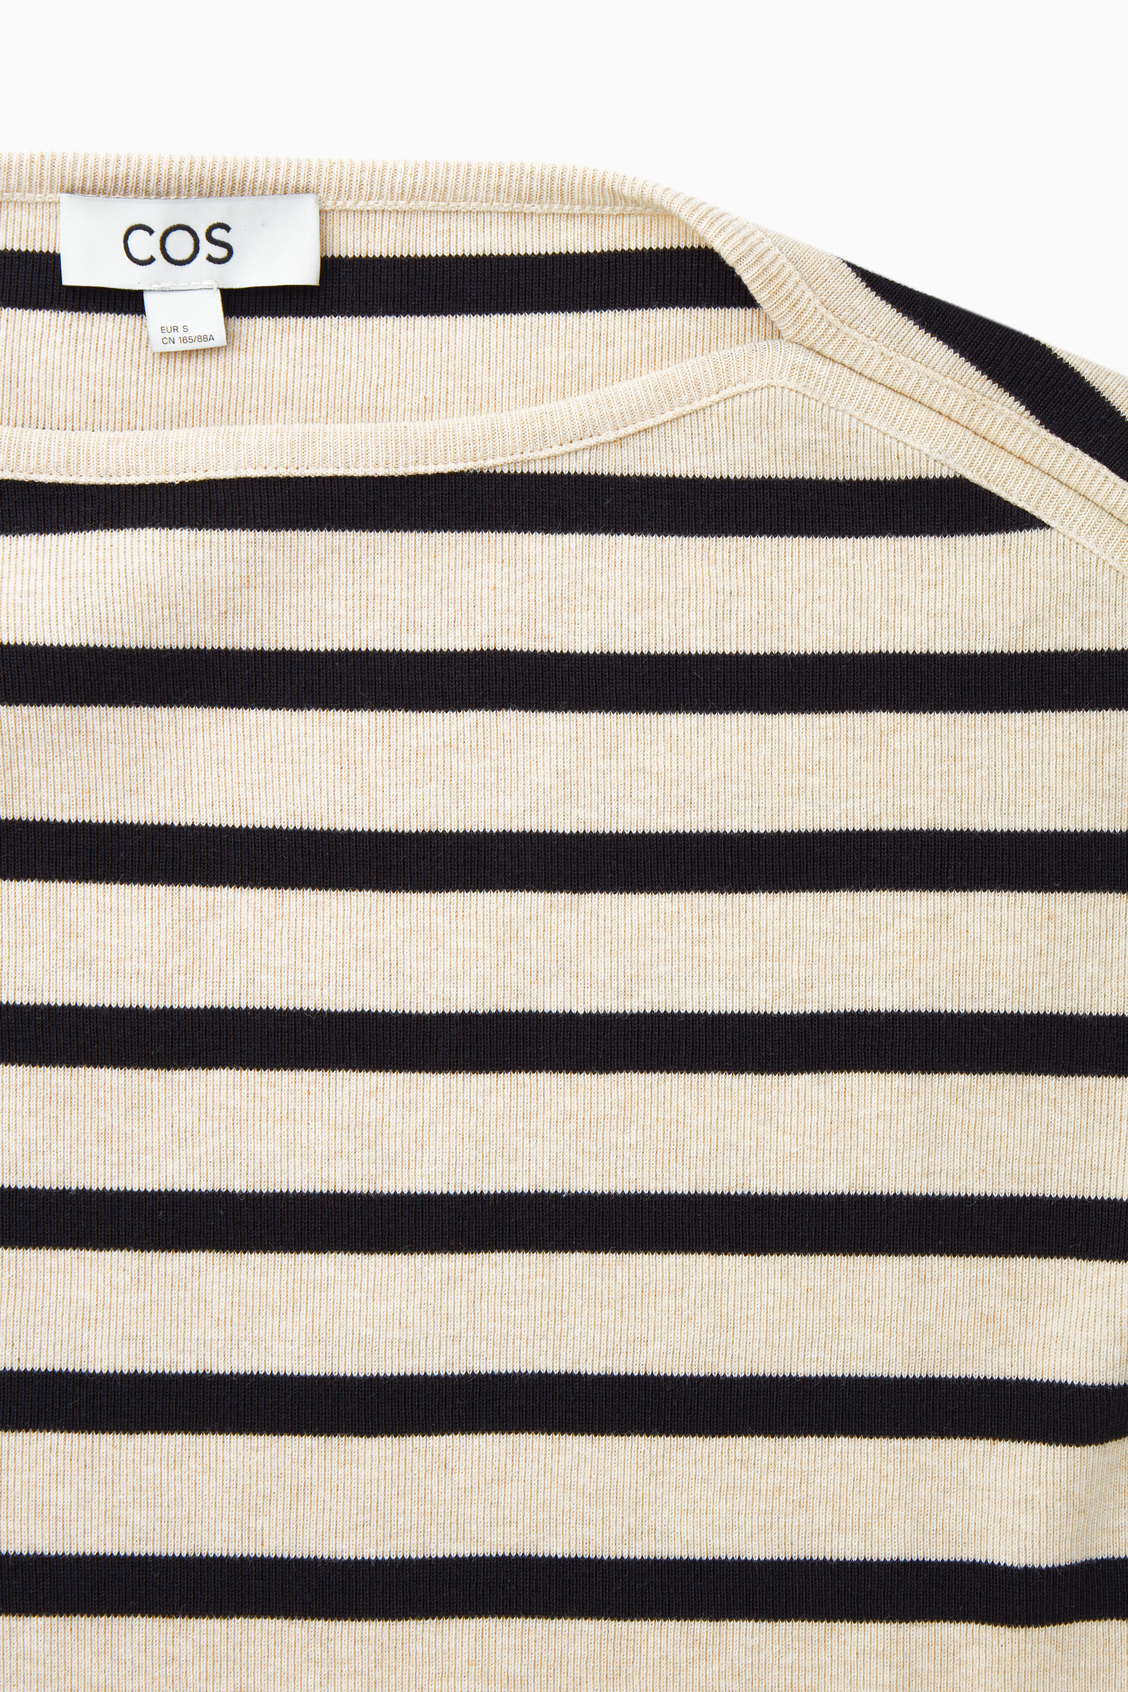 COS - New from the COS core collection: discover our striped cotton shirt  crafted from pure cotton.​ Discover the COS core collection